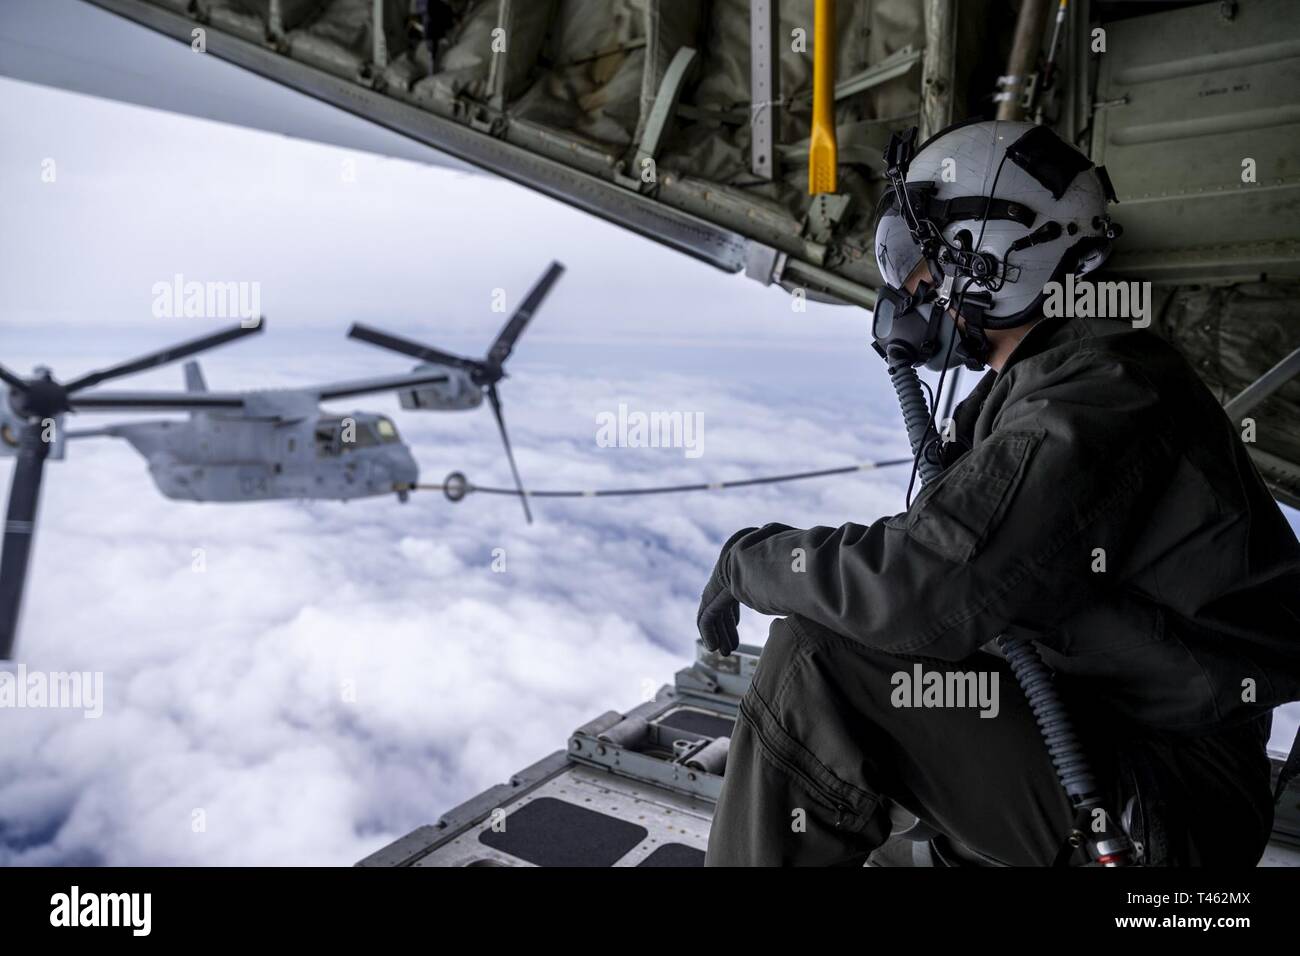 U.S. Marine Corps Cpl. Jack Bourgeois, a KC-130J Super Hercules crewmaster with Marine Aerial Refueler Transport Squadron (VMGR) 152, observes an MV-22B Osprey tiltrotor aircraft belonging to Marine Medium Tiltrotor Squadron 262 (Reinforced) off the coast of Japan, Feb. 28, 2019. U.S. Marines with VMGR-152 provide a wide range of capabilities throughout the INDOPACOM area to include aerial refueling, personnel and cargo transportation, and aerial delivery. Stock Photo